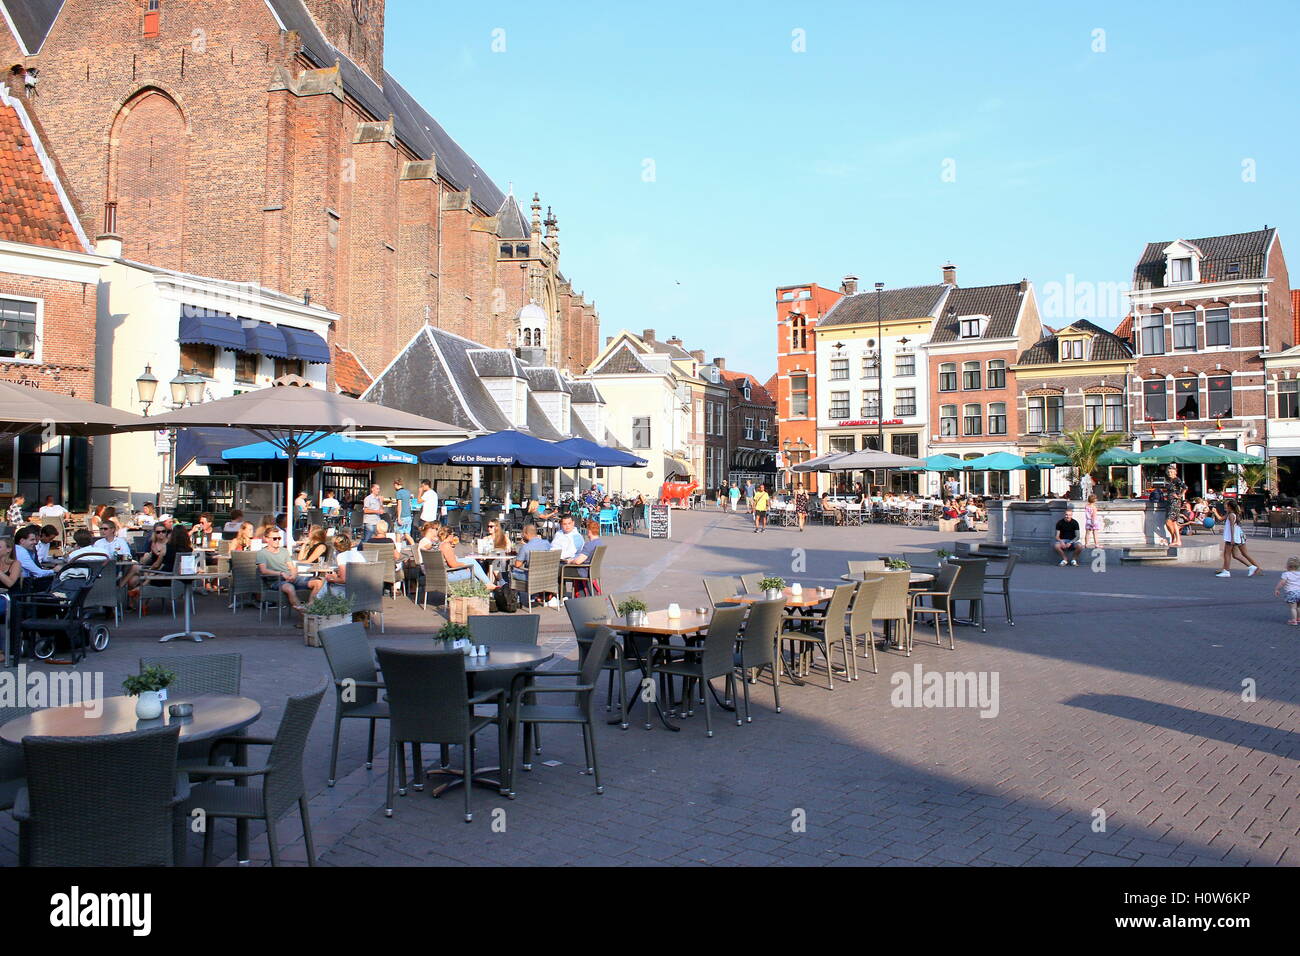 Terraces in summer on Hof square in the inner city of Amersfoort, Utrecht Province, The Netherlands Stock Photo